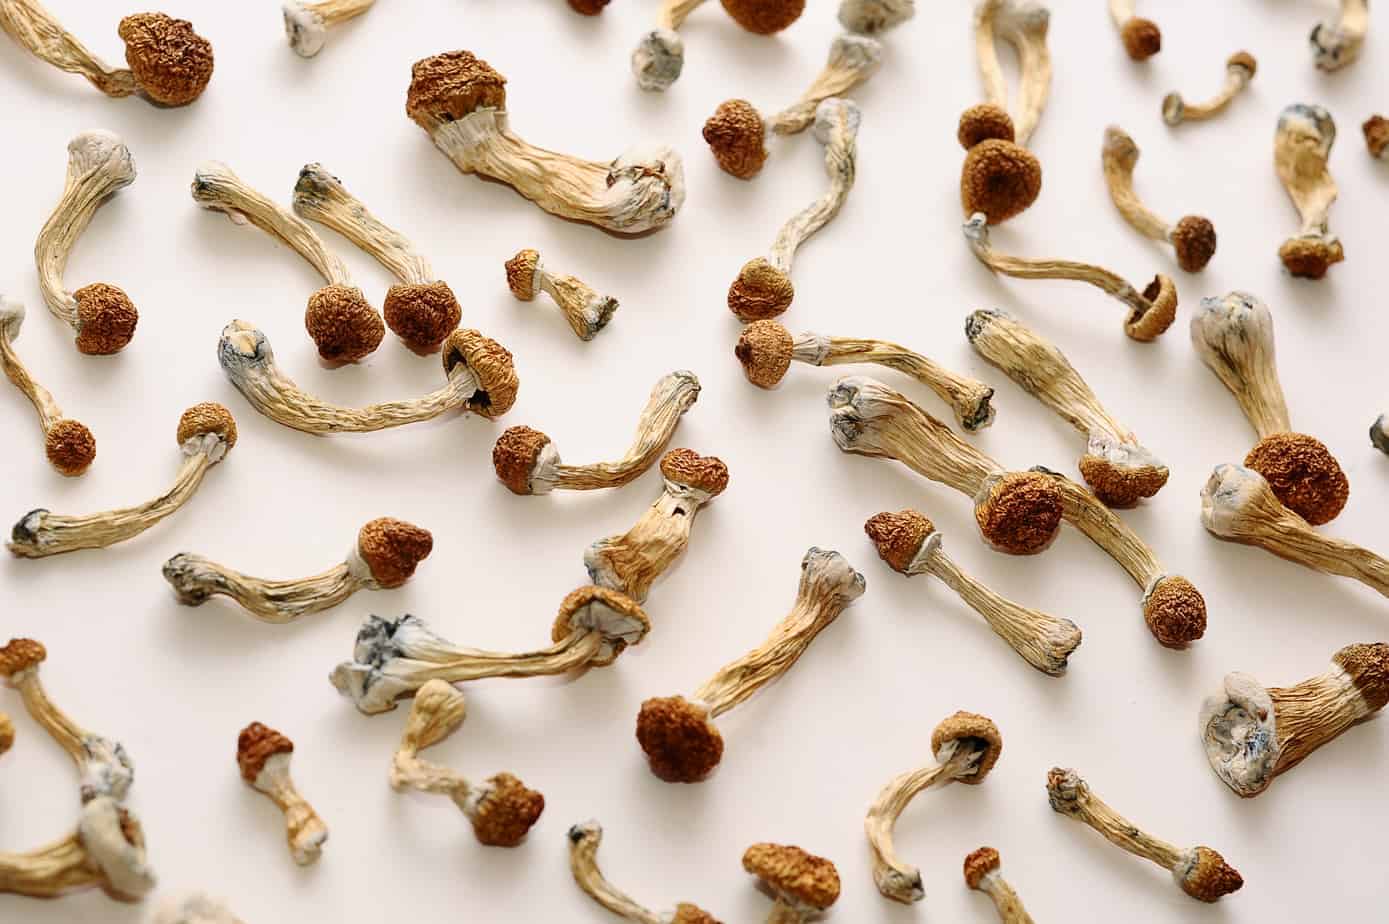 How To Sober Up From Shrooms?
